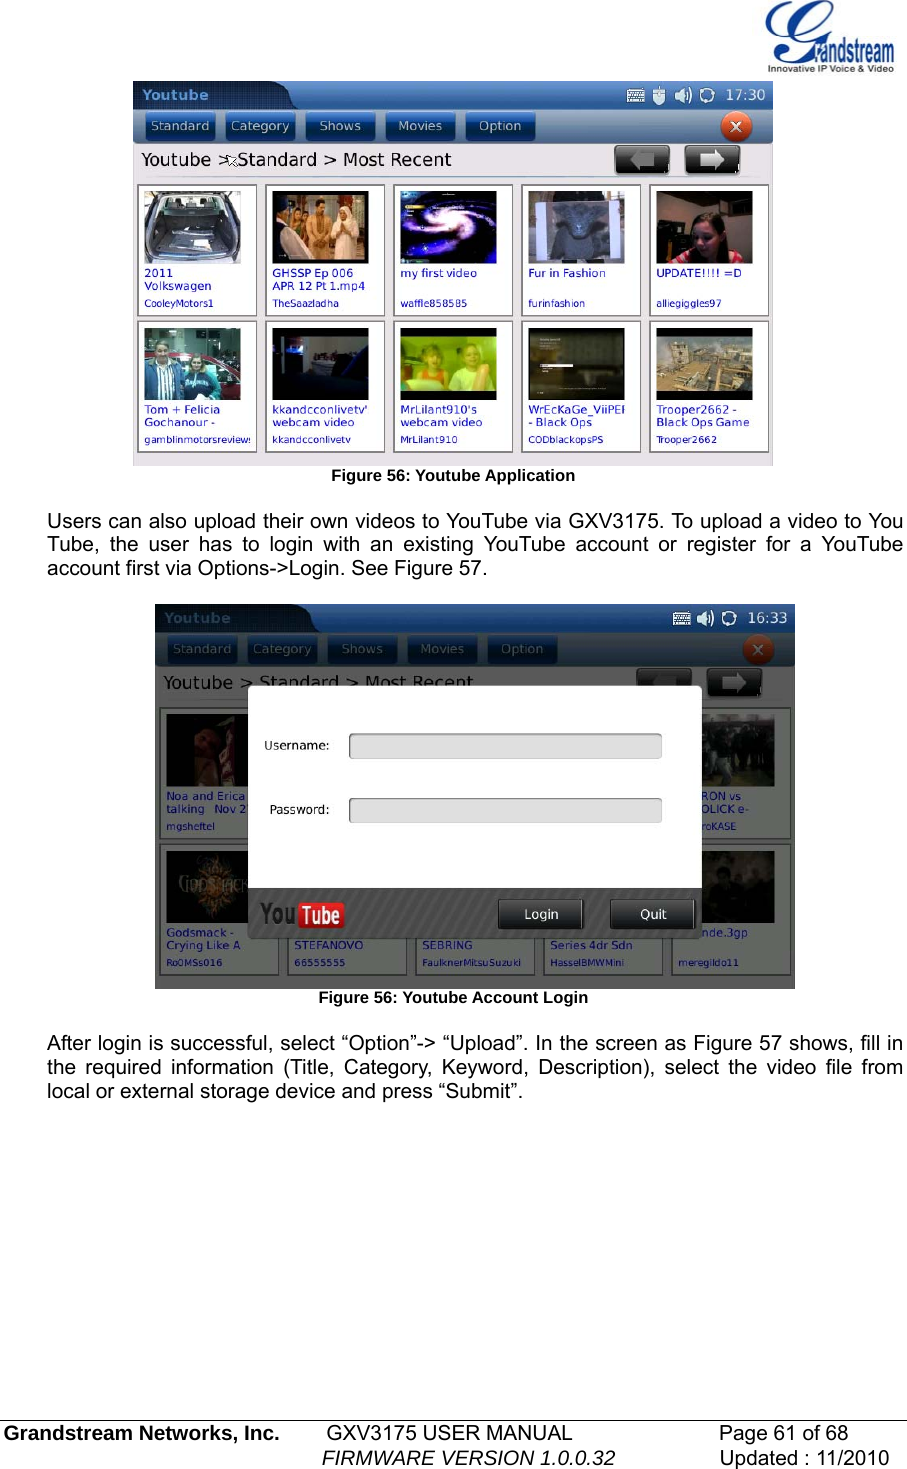    Figure 56: Youtube Application  Users can also upload their own videos to YouTube via GXV3175. To upload a video to You Tube, the user has to login with an existing YouTube account or register for a YouTube account first via Options-&gt;Login. See Figure 57.   Figure 56: Youtube Account Login  After login is successful, select “Option”-&gt; “Upload”. In the screen as Figure 57 shows, fill in the required information (Title, Category, Keyword, Description), select the video file from local or external storage device and press “Submit”.   Grandstream Networks, Inc.        GXV3175 USER MANUAL                      Page 61 of 68                                                        FIRMWARE VERSION 1.0.0.32                  Updated : 11/2010  